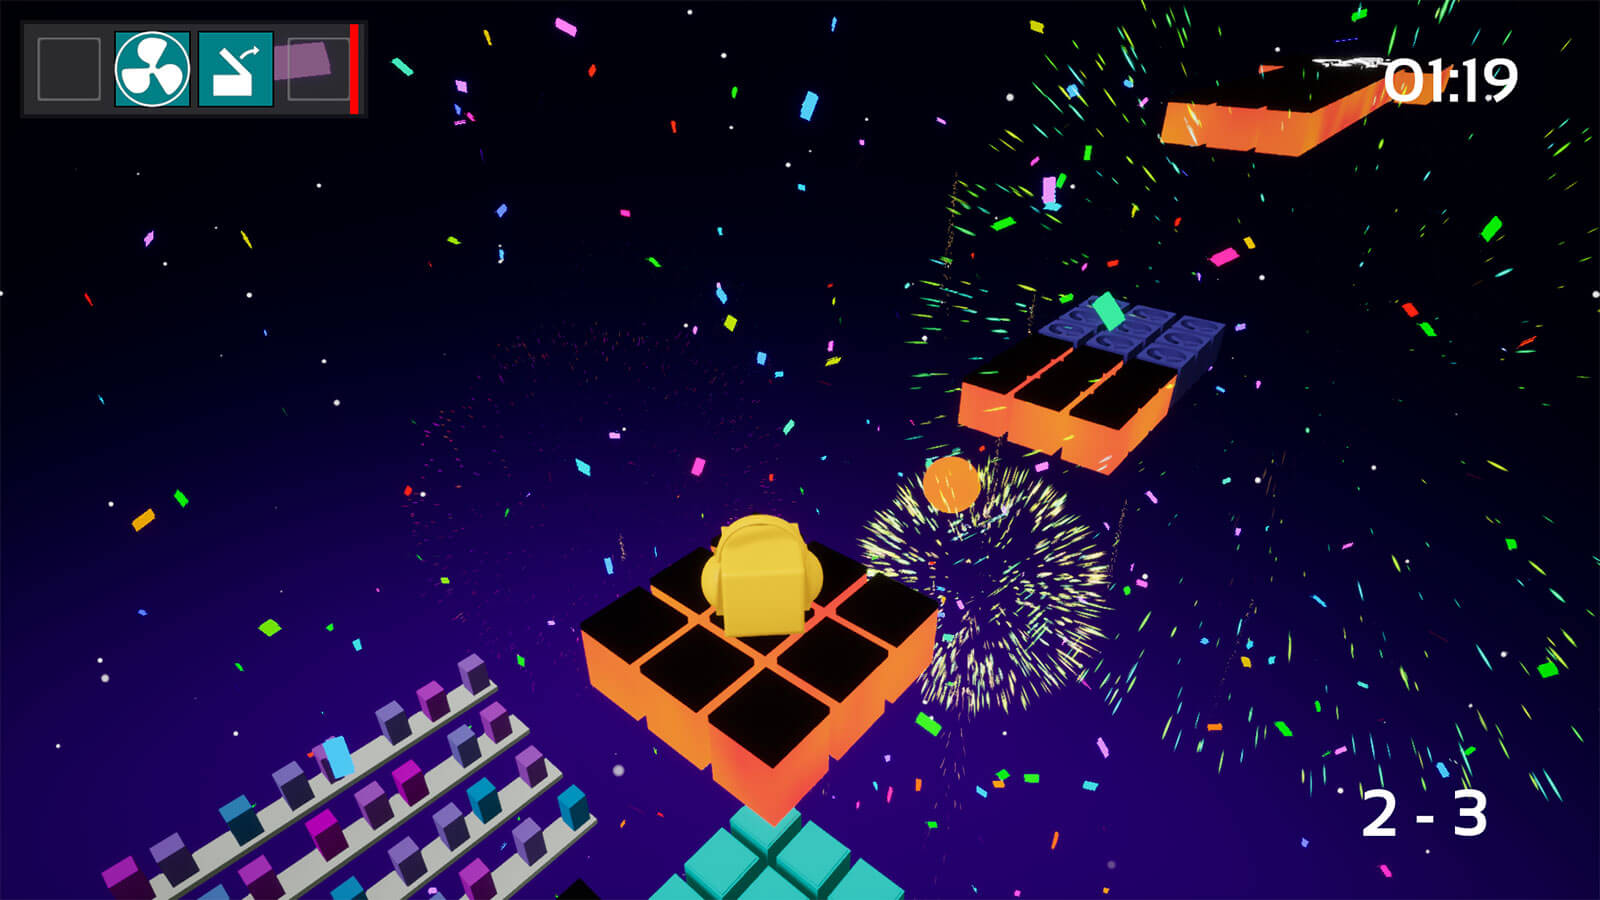 A golden block moves on a platform with multi-colored fireworks exploding in the background